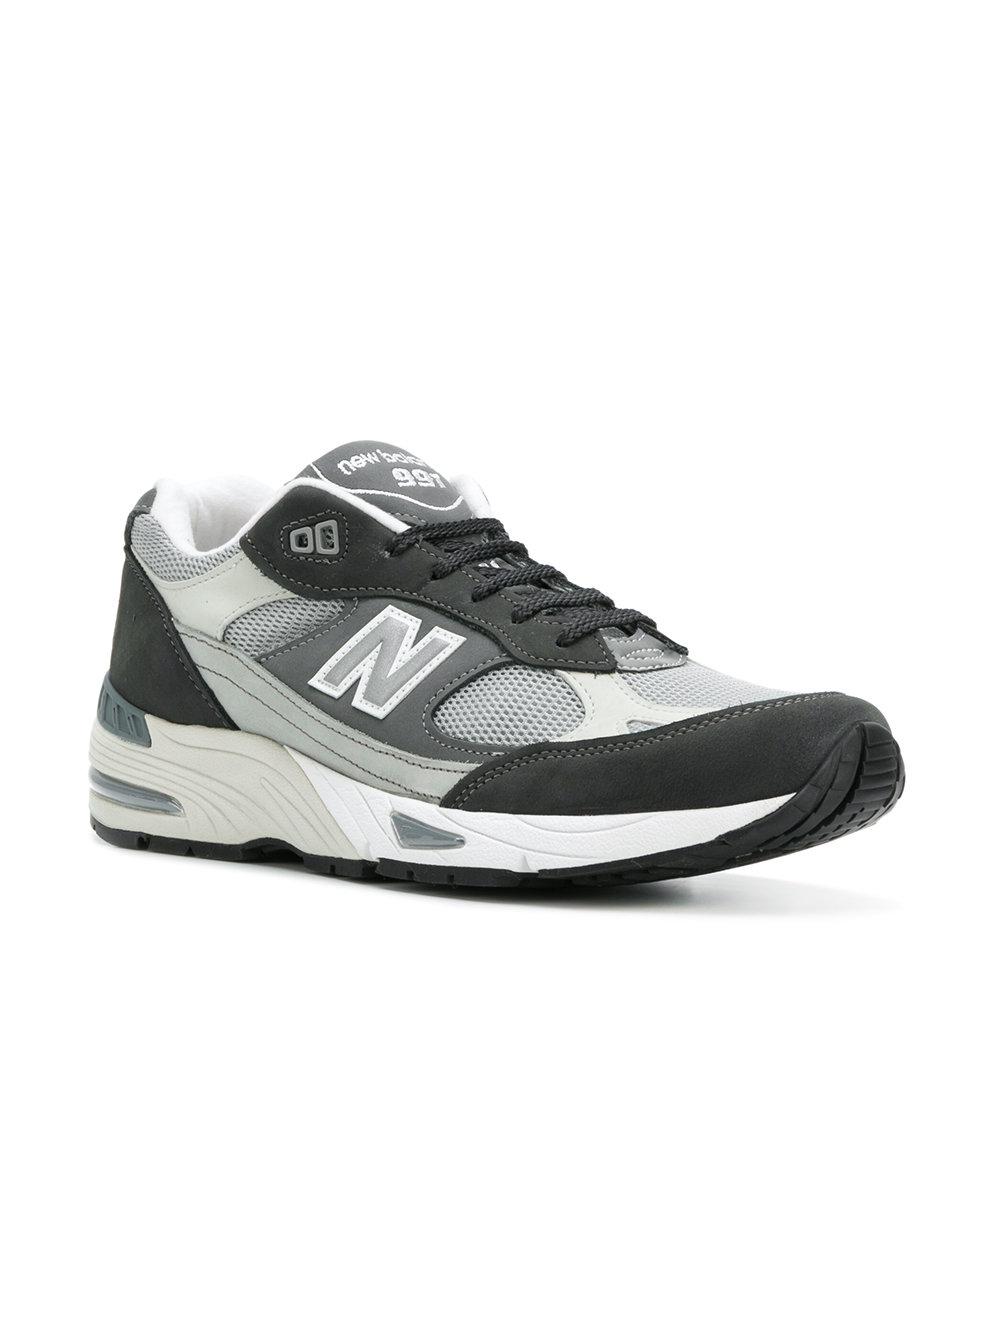 New Balance Leather 911 Made In Uk Sneakers in Grey (Gray) for Men - Lyst